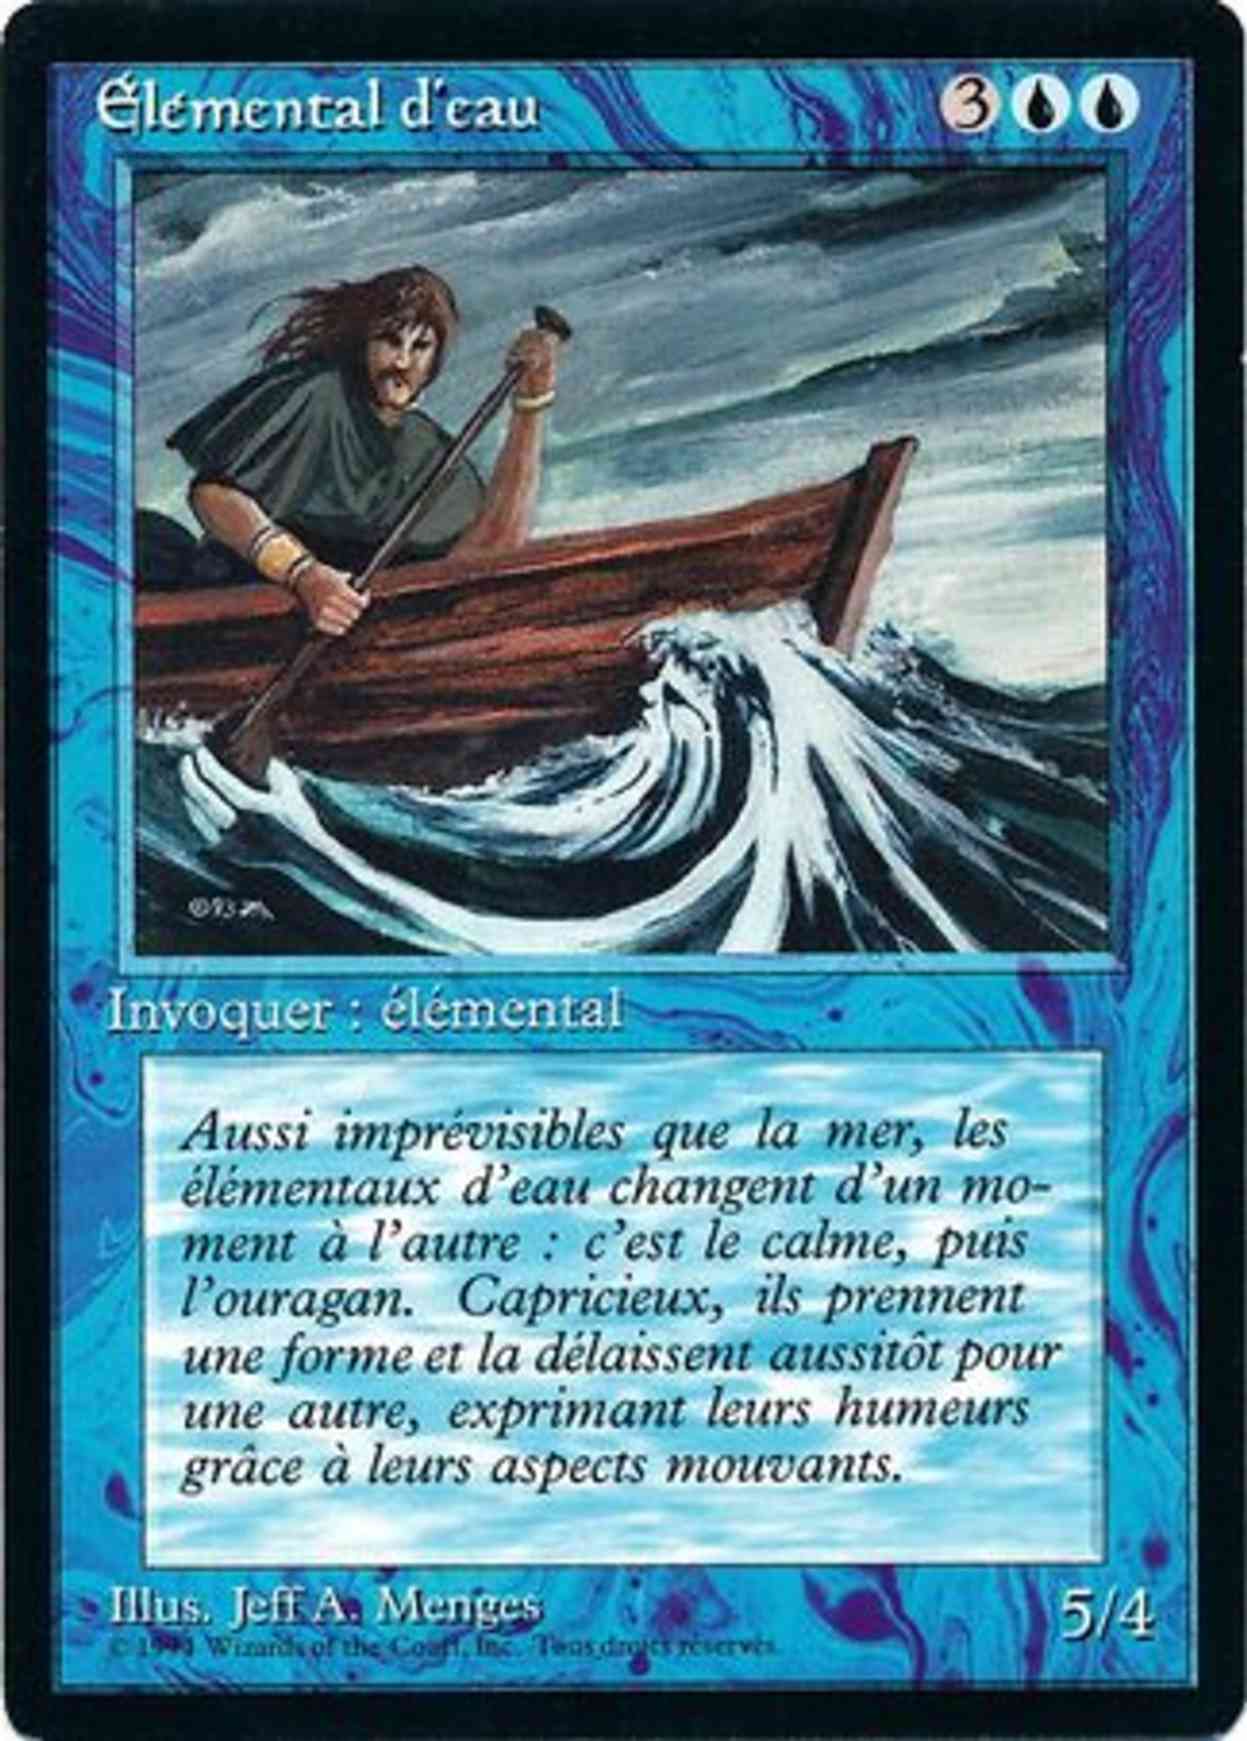 Water Elemental magic card front